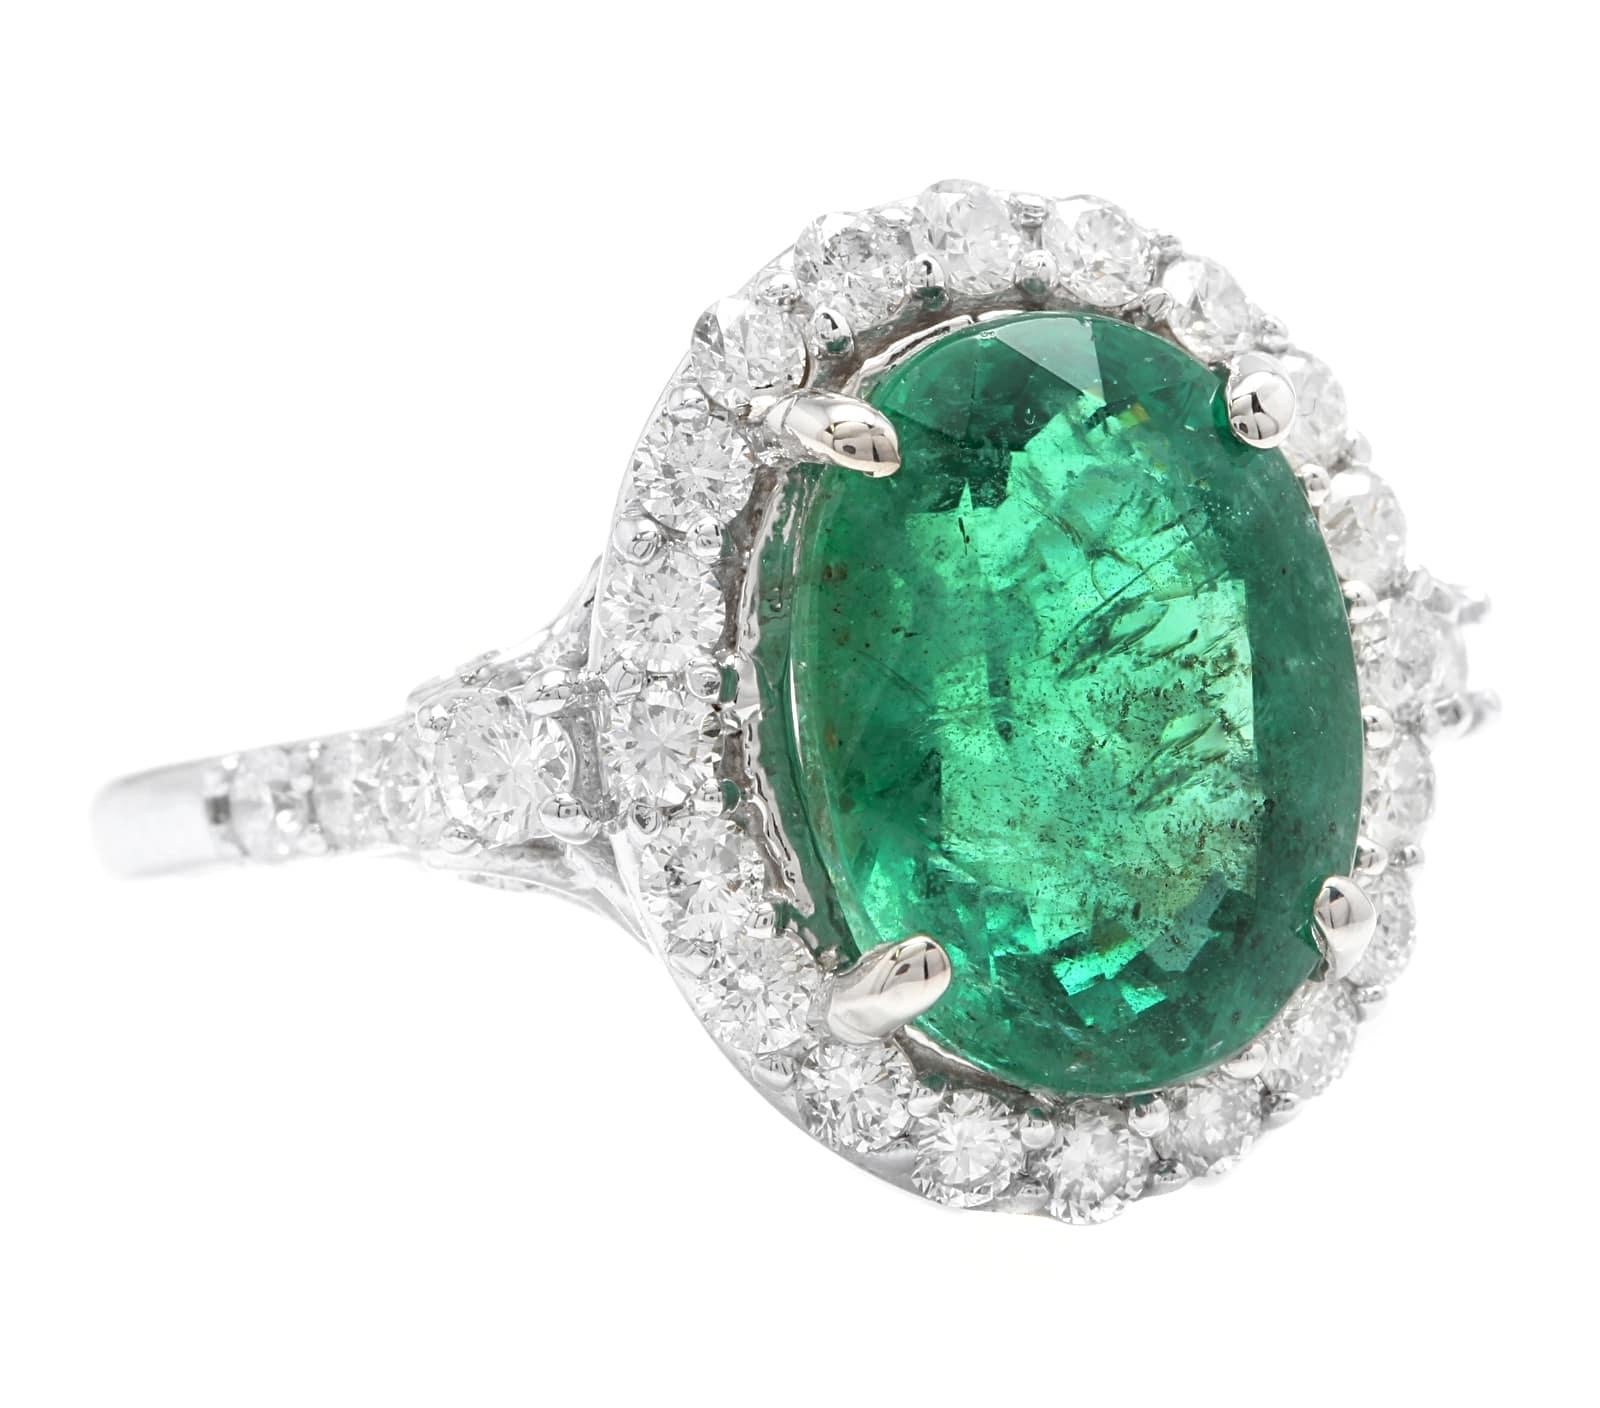 5.00 Carats Natural Emerald and Diamond 14K Solid White Gold Ring

Suggested Replacement Value: $6,500.00

Total Natural Oval Green Emerald Weight is: Approx. 4.20 Carats (transparent)

Emerald Treatment: Oiling  

Emerald Measures: Approx. 11.50 x